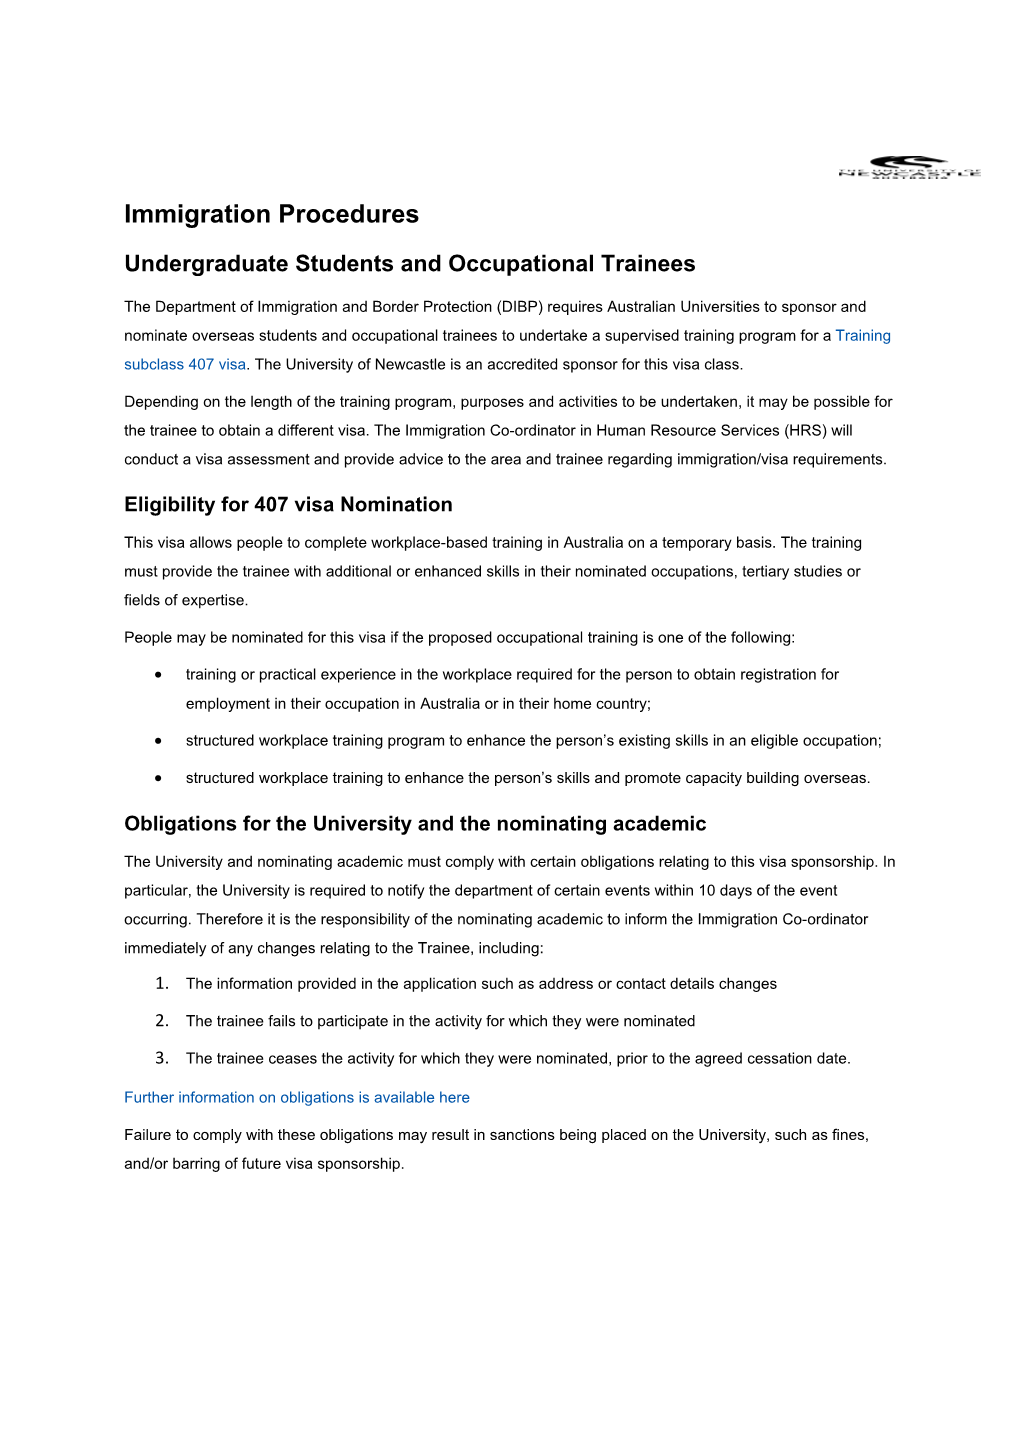 Undergraduate Students and Occupational Trainees